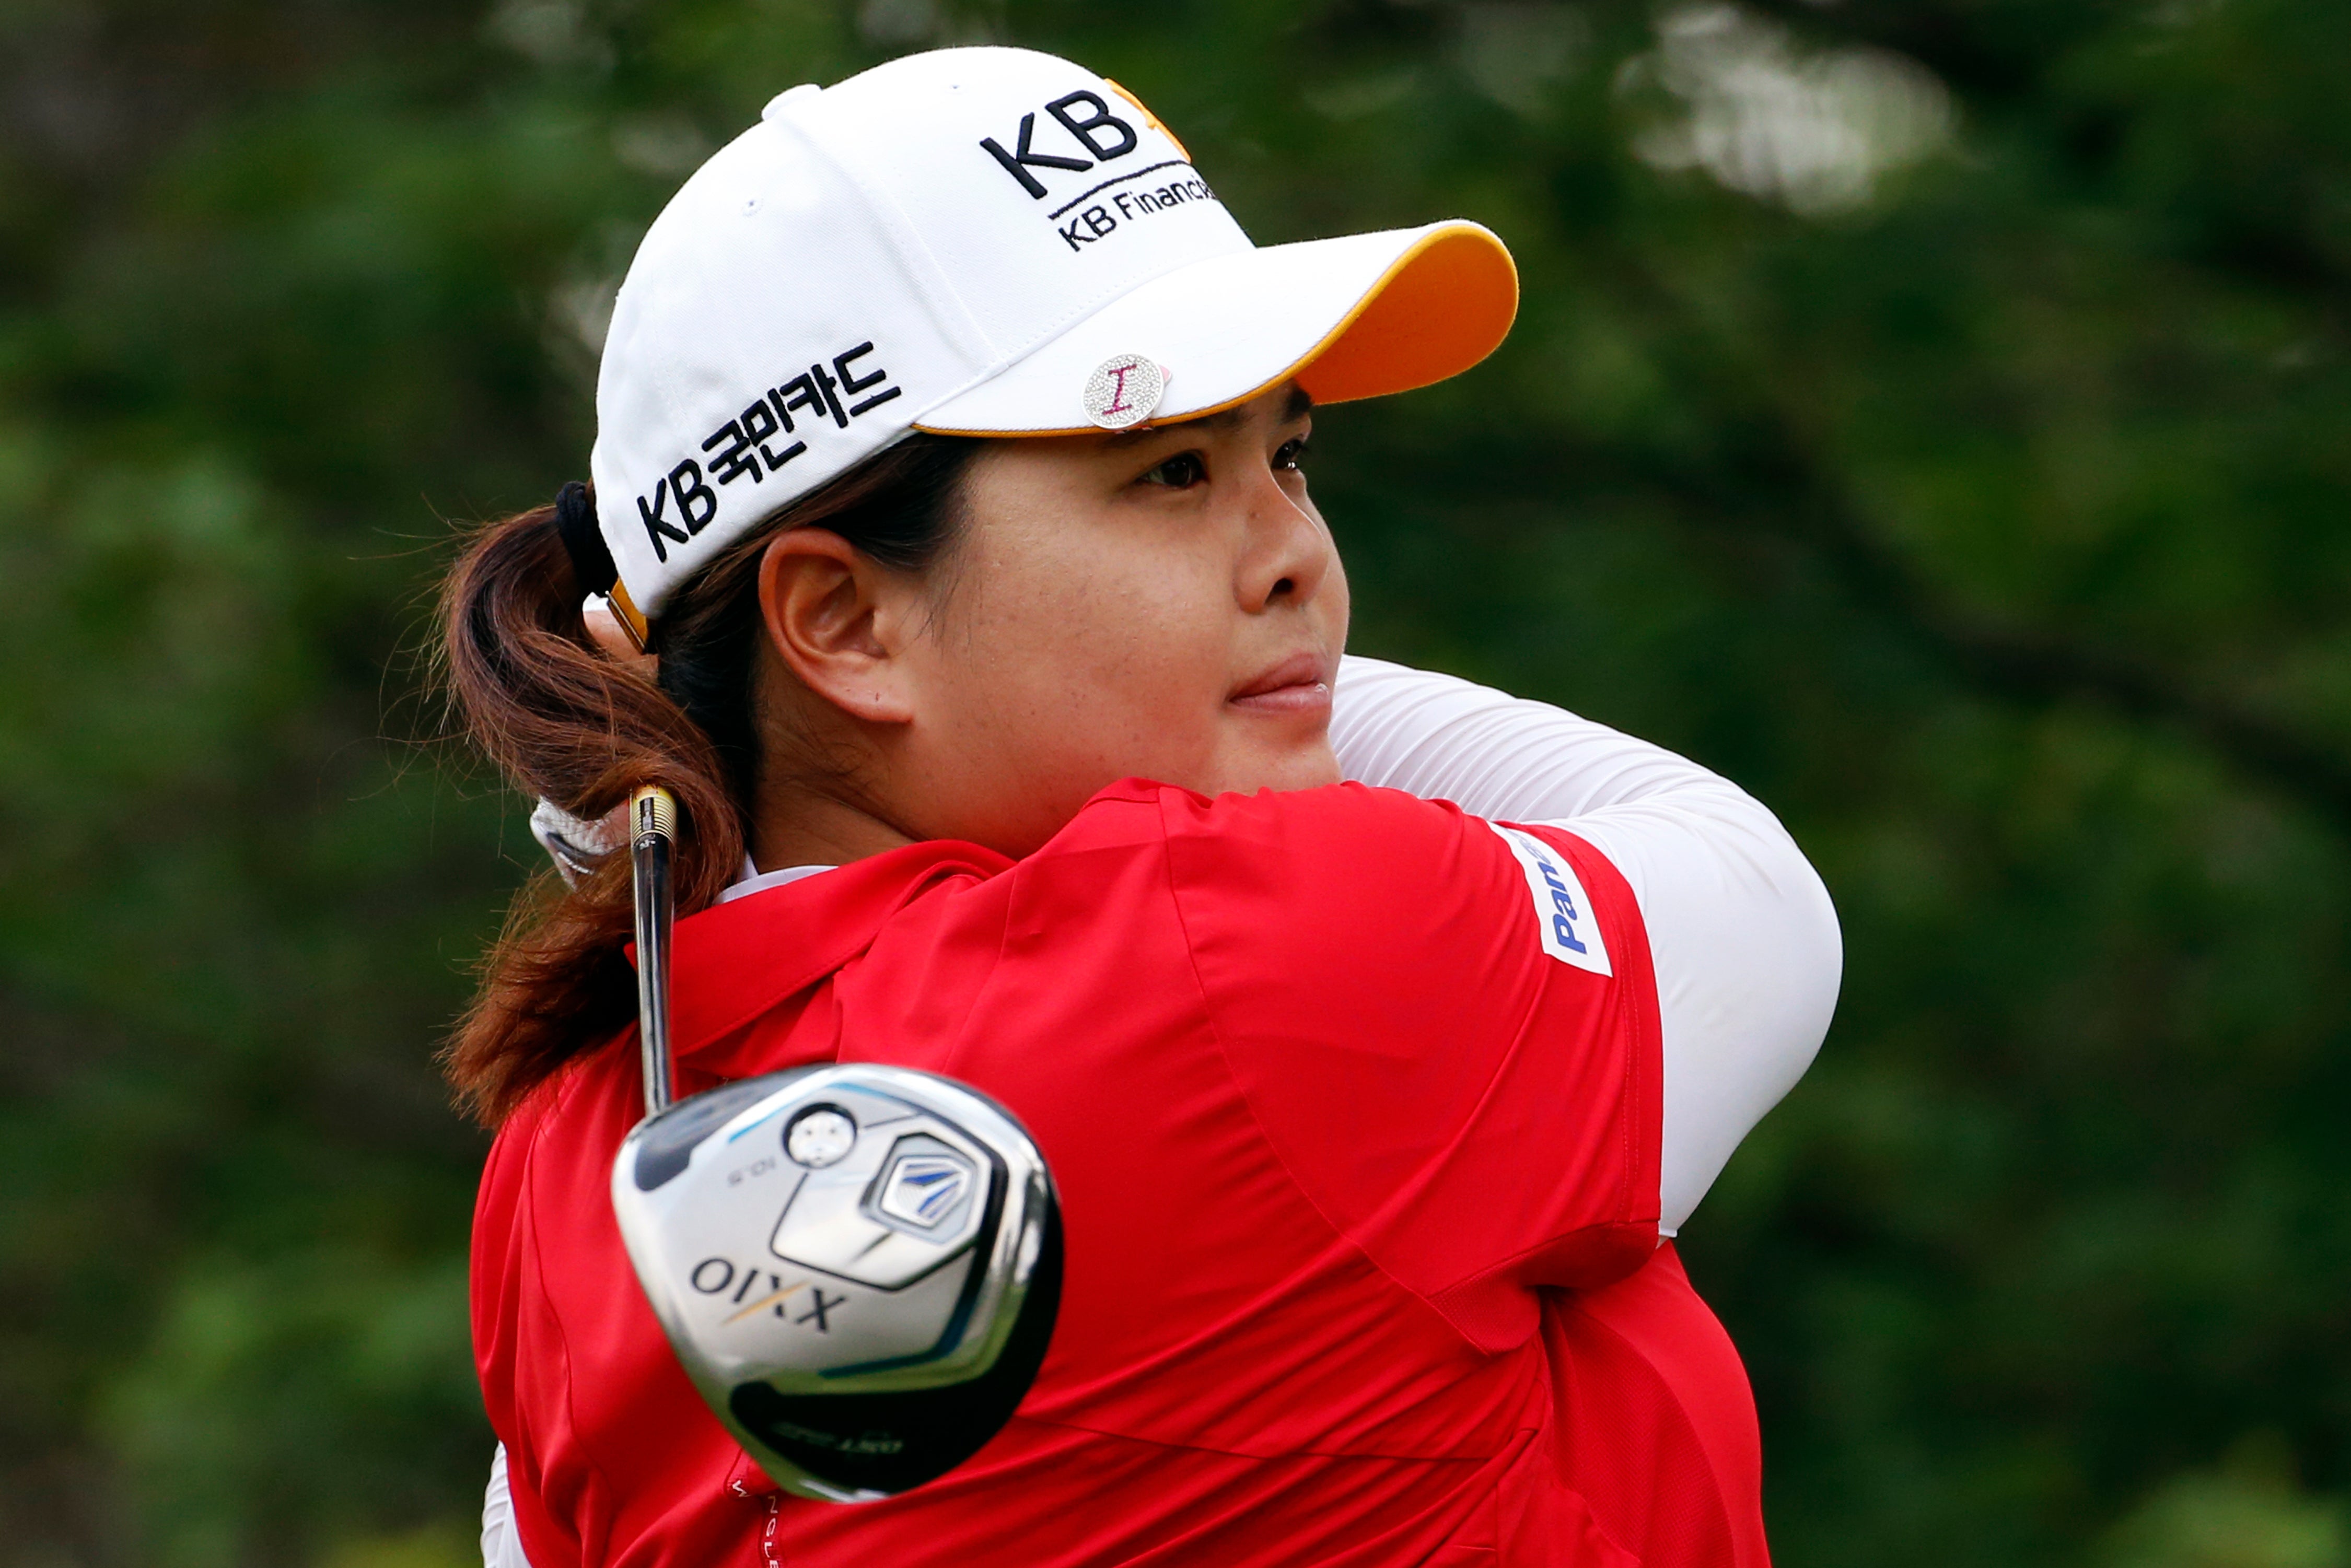 U.S. Womens Open: Inbee Park Ready For Run at Third Title